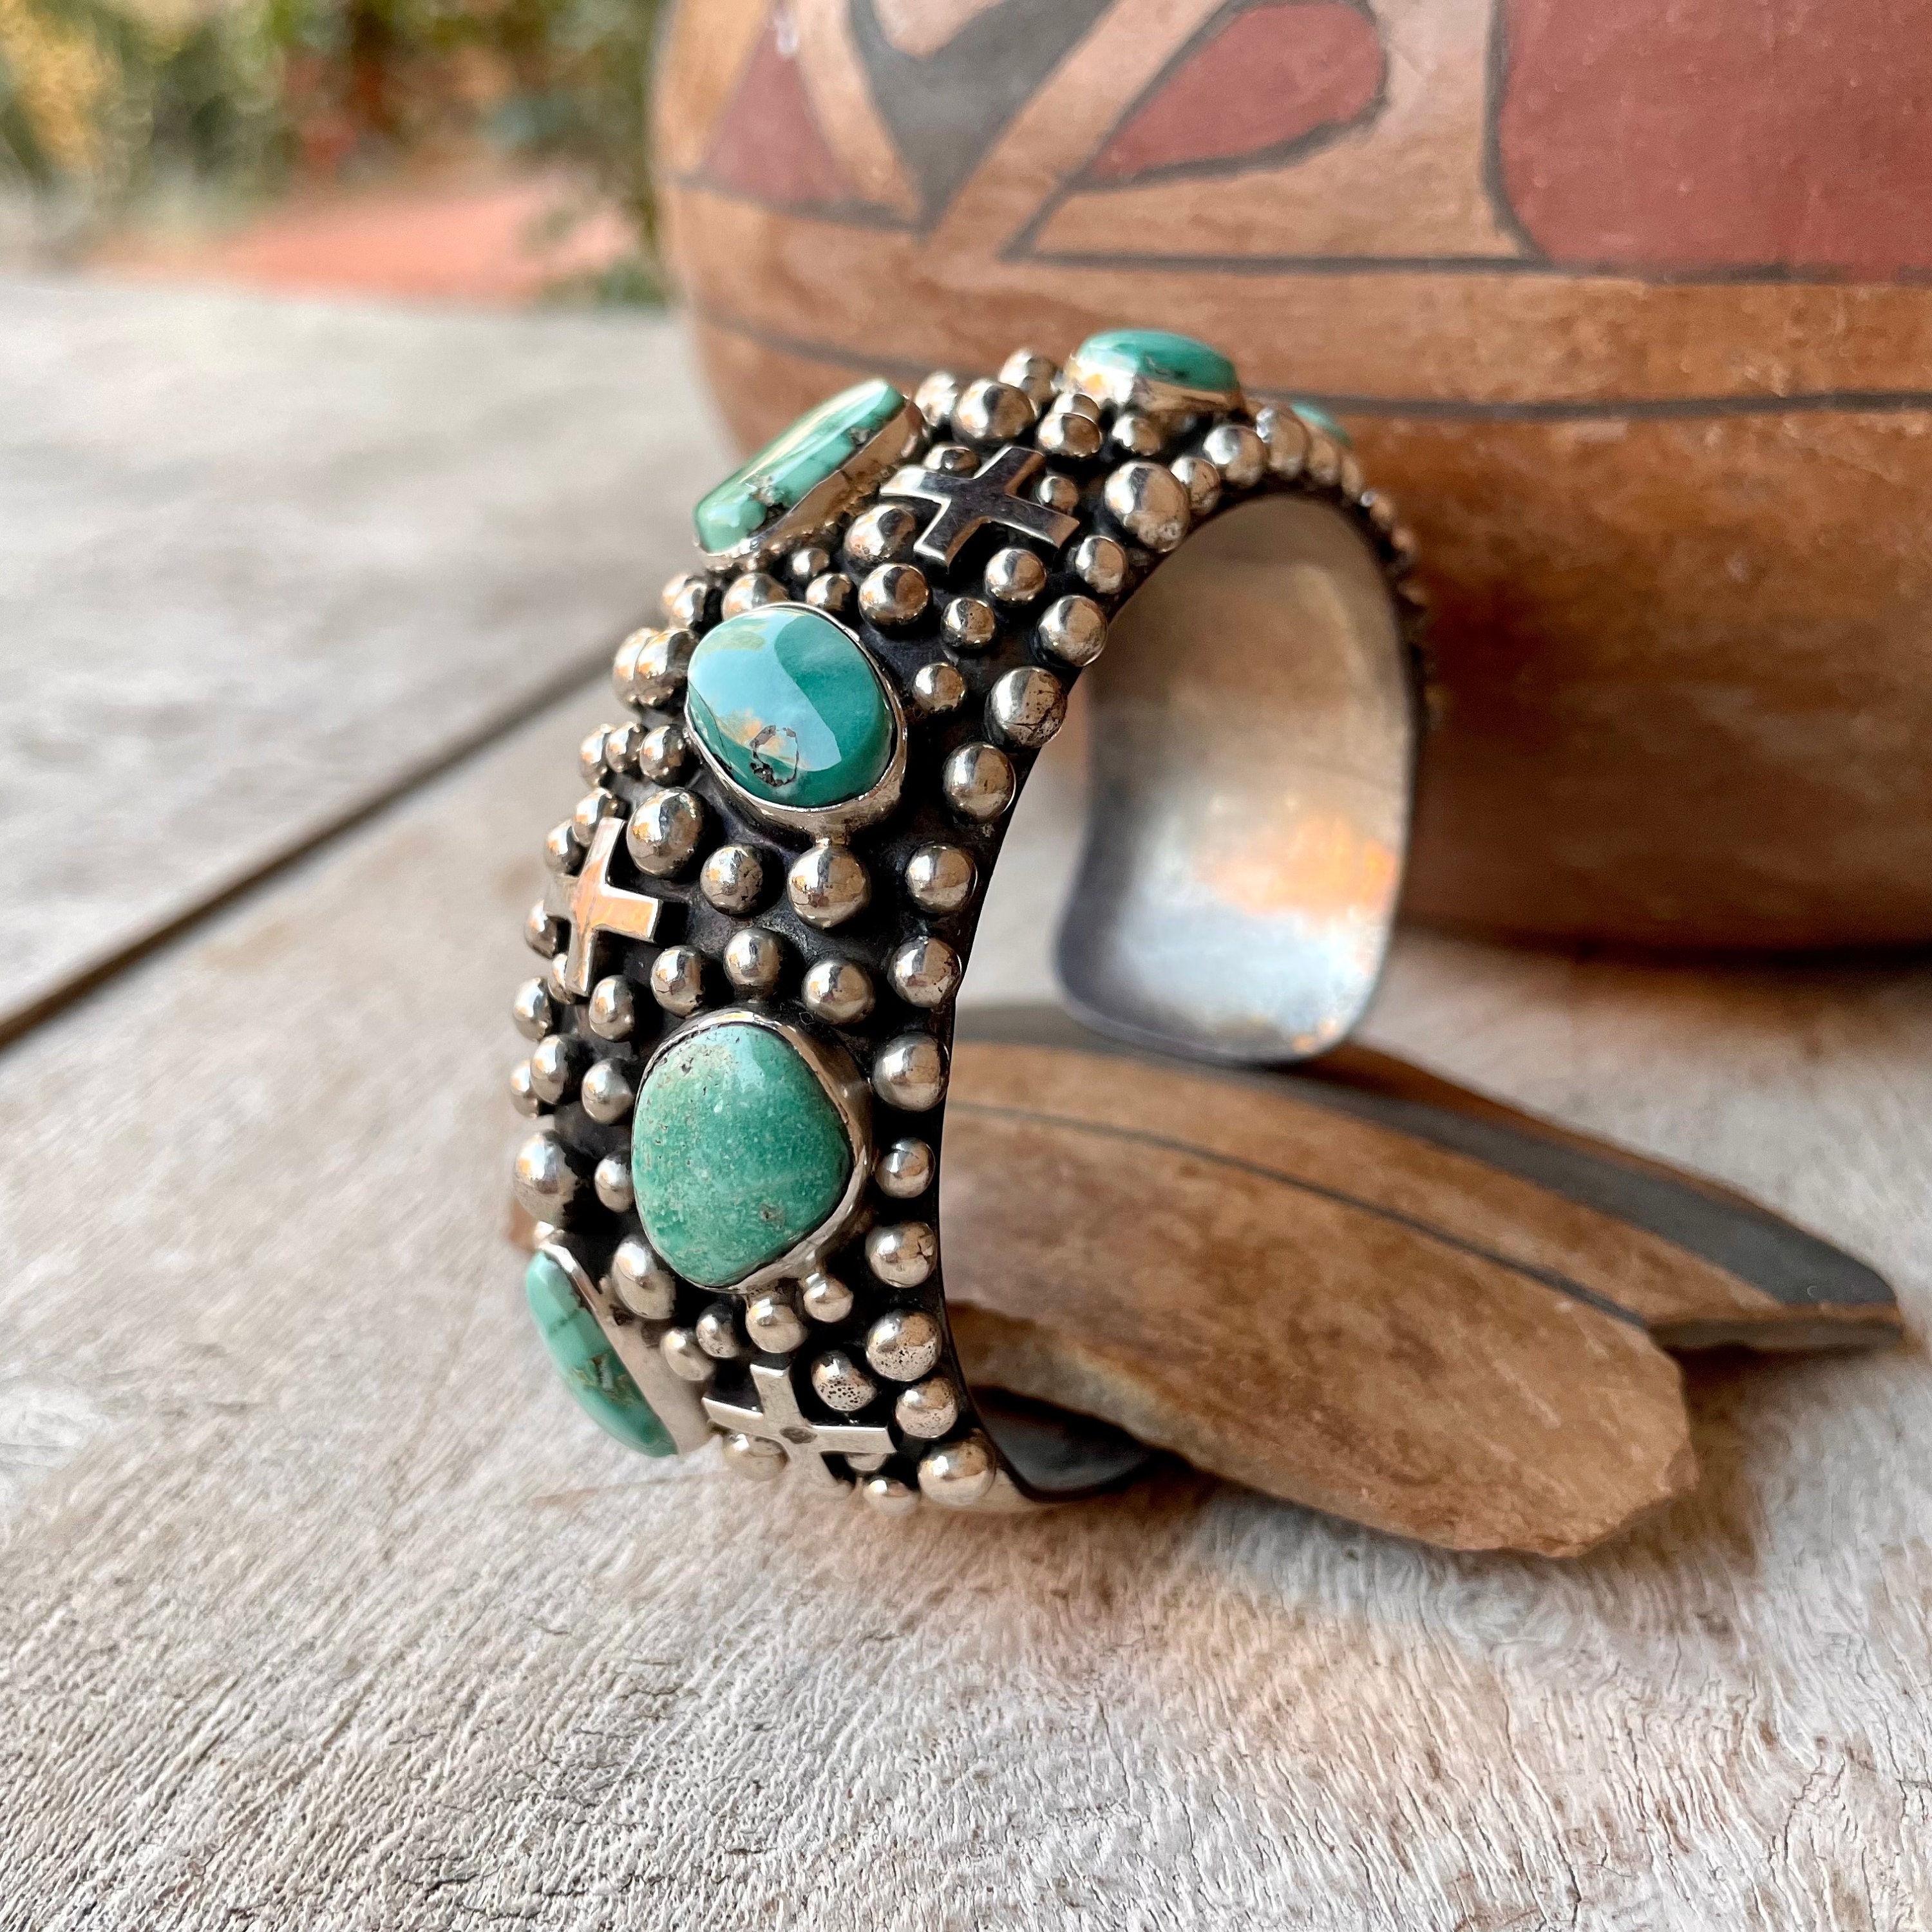 Vintage Turquoise Sterling Silver Cuff Bracelet - Etsy | Sterling silver  cuff bracelet, Turquoise jewelry native american, Silver cuff